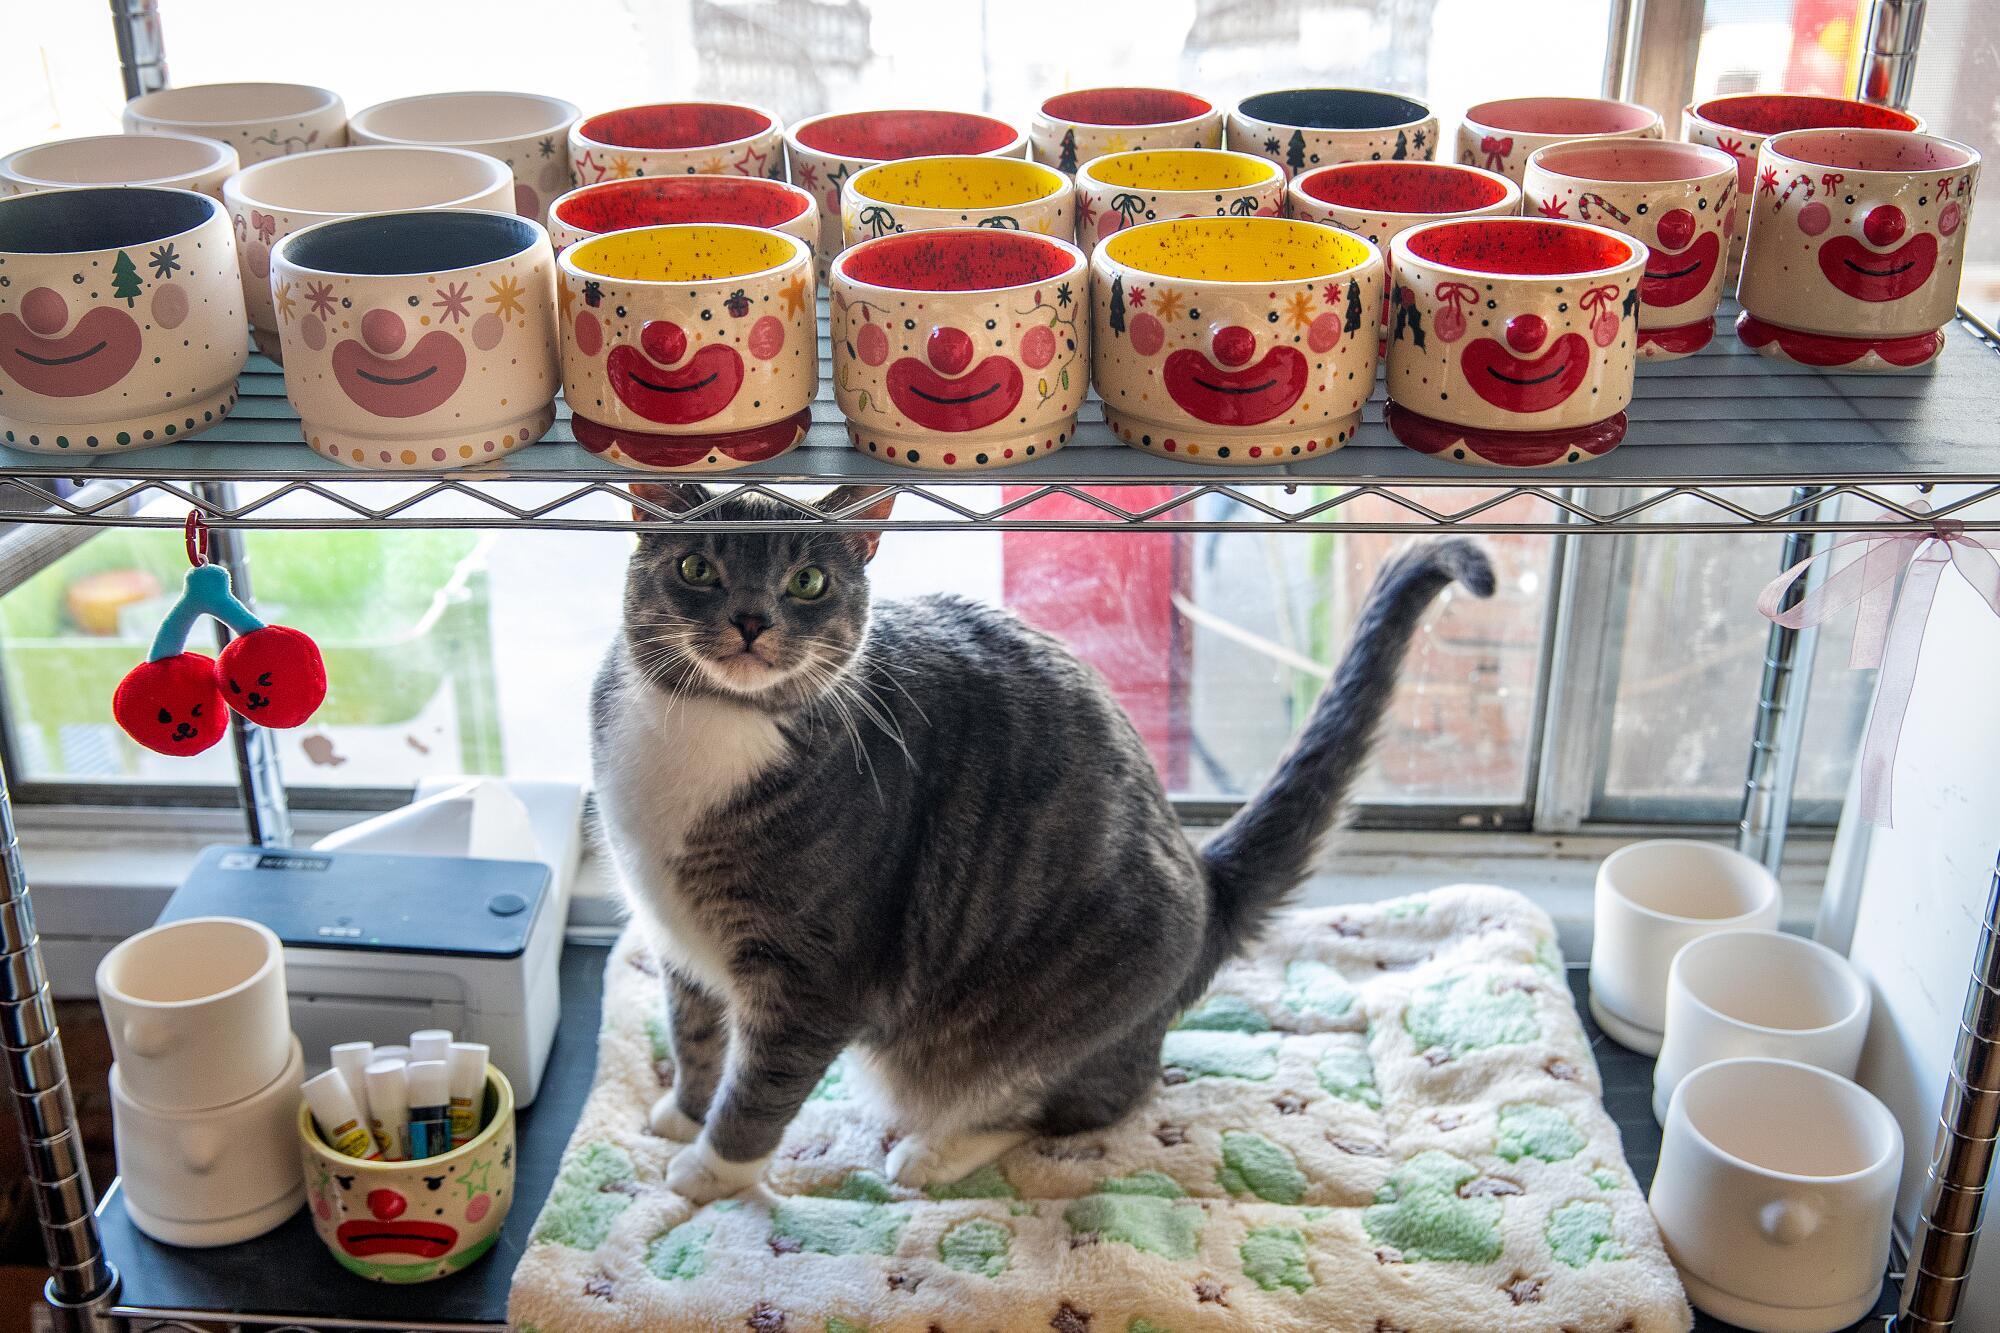 Yoshi, Yousefi's cat, gets a closer look at the cups and bowls.